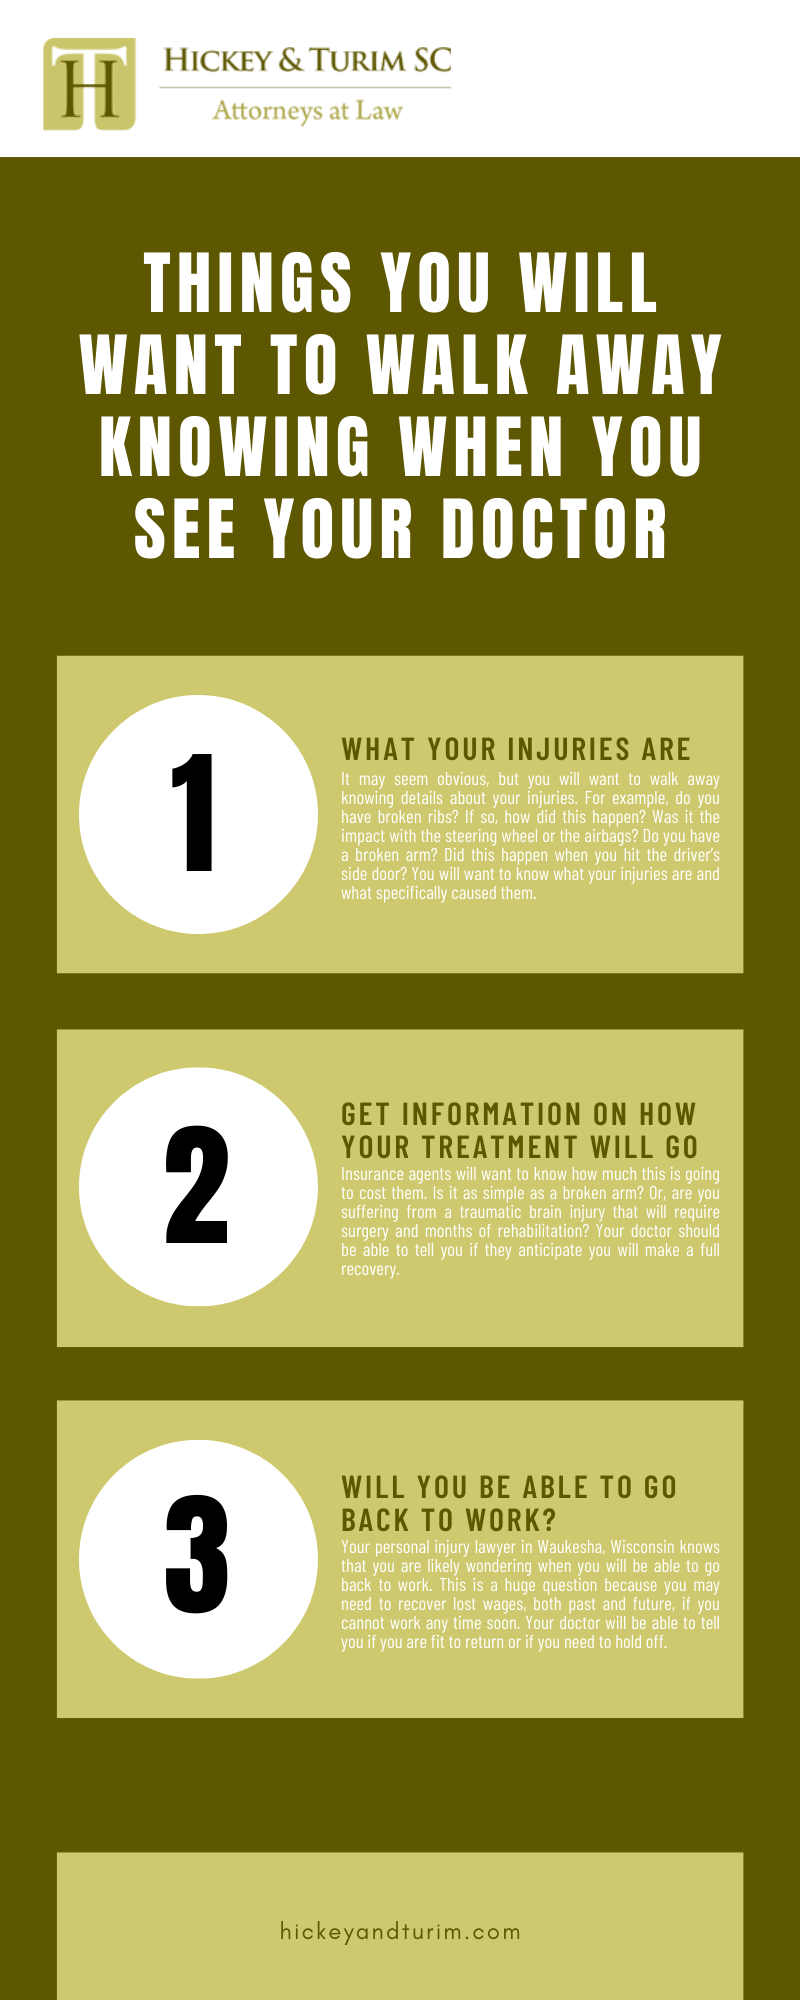 things you will want to walk away knowing when you see your doctor infographic